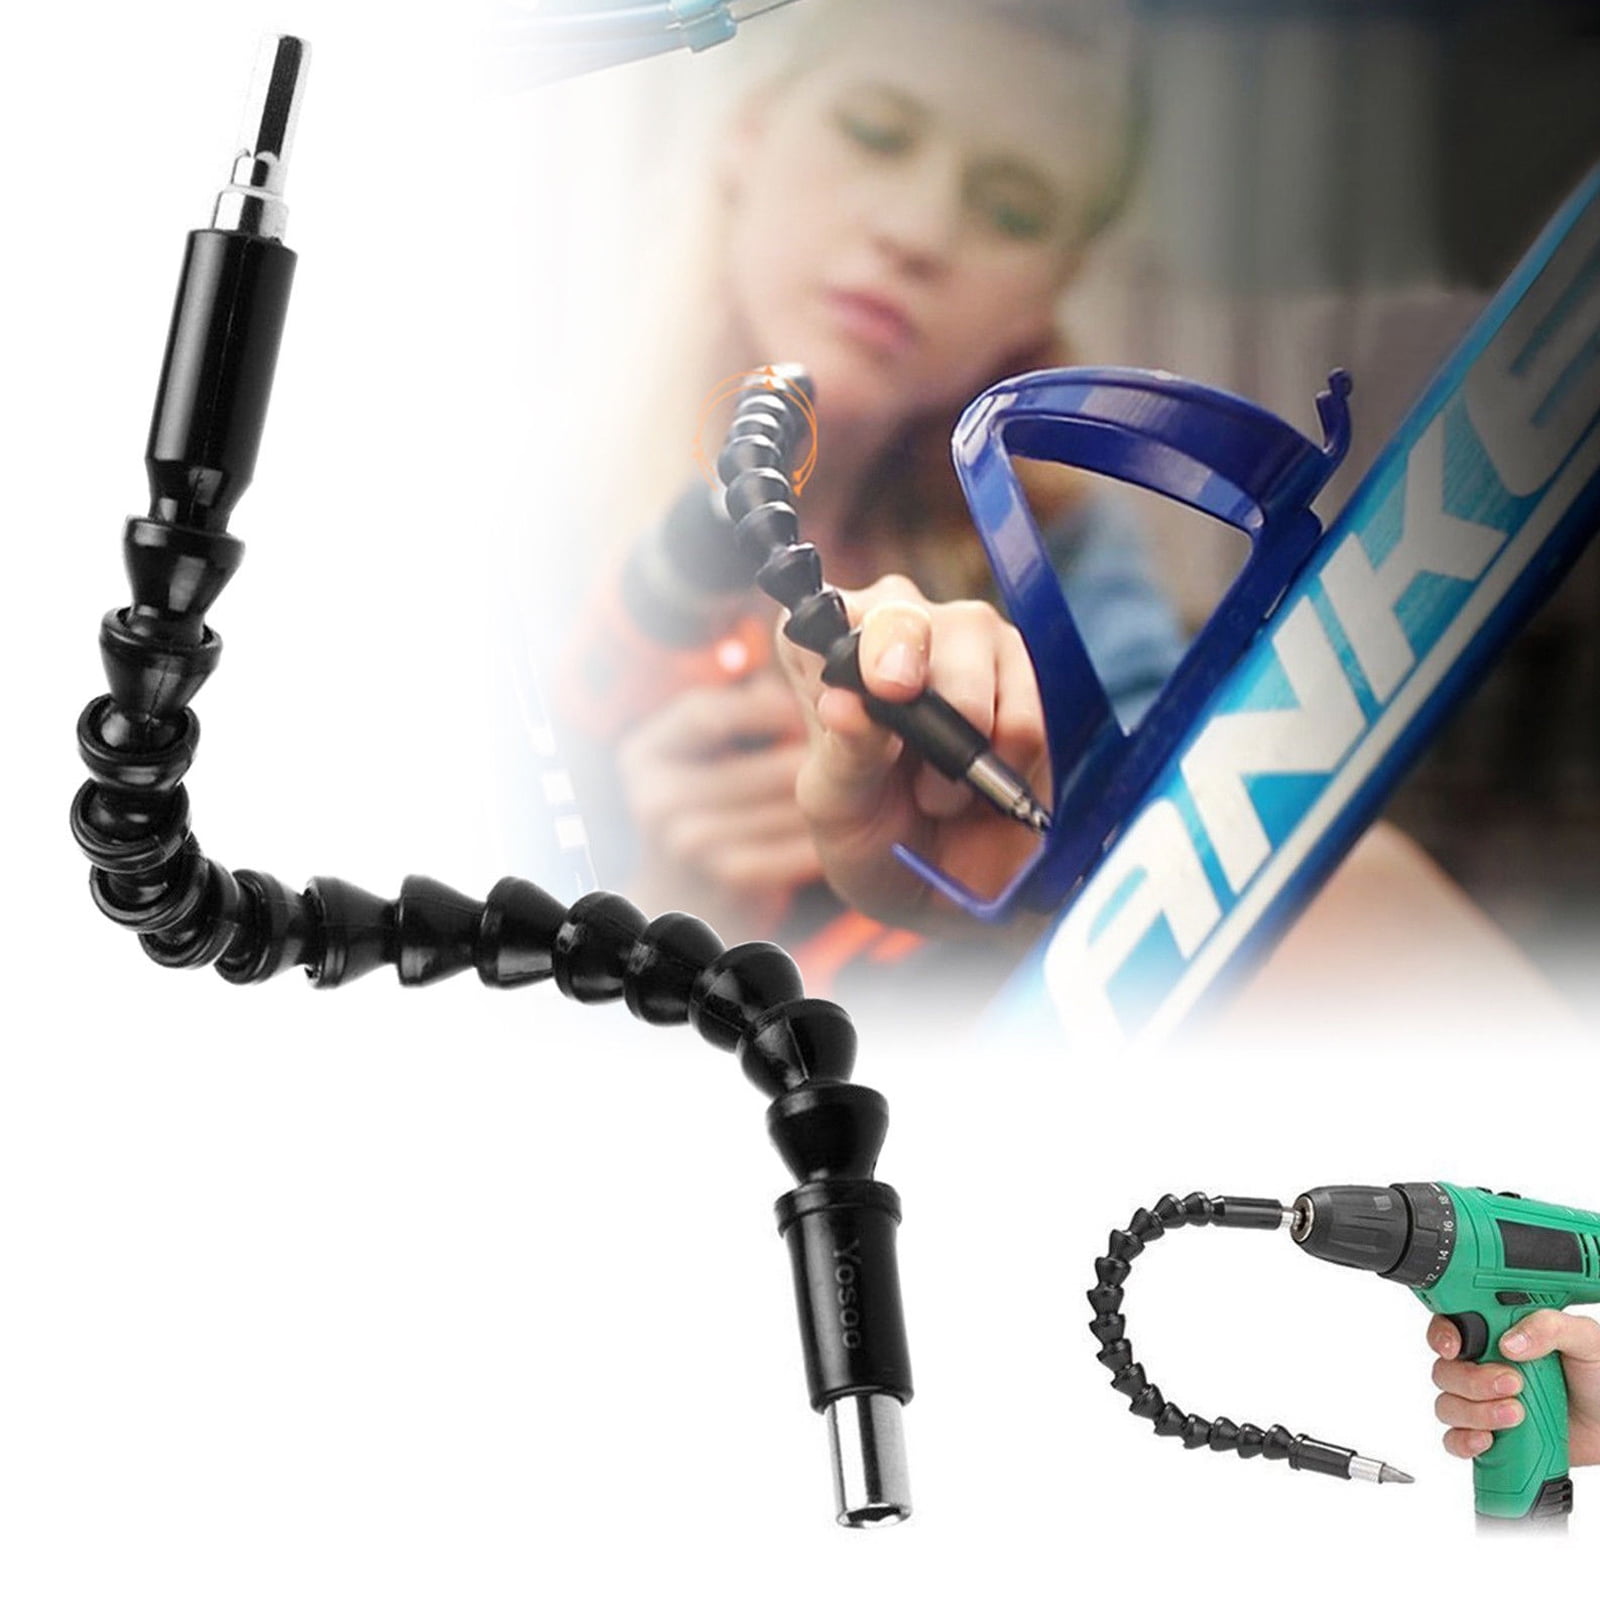 Flexible Shaft Magnetic Steel Wrench Tool Electronics Drill Screwdriver Bit Holder Connect Snake Flexible Hose Cardan Shaft Connection Soft Extension Rod Link